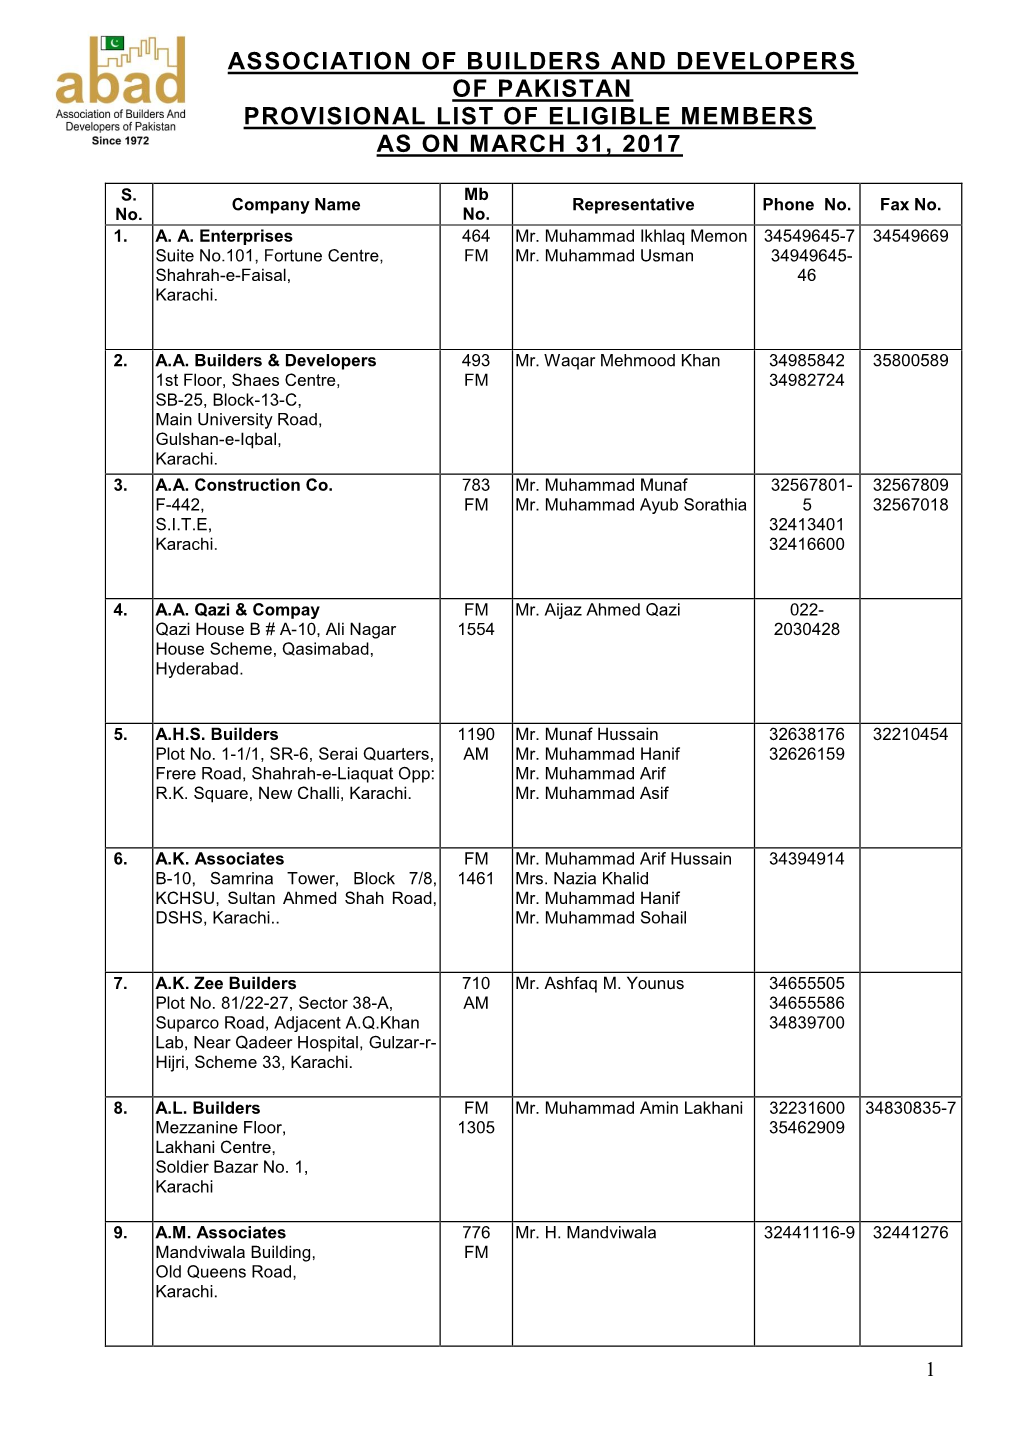 Association of Builders and Developers of Pakistan Provisional List of Eligible Members As on March 31, 2017